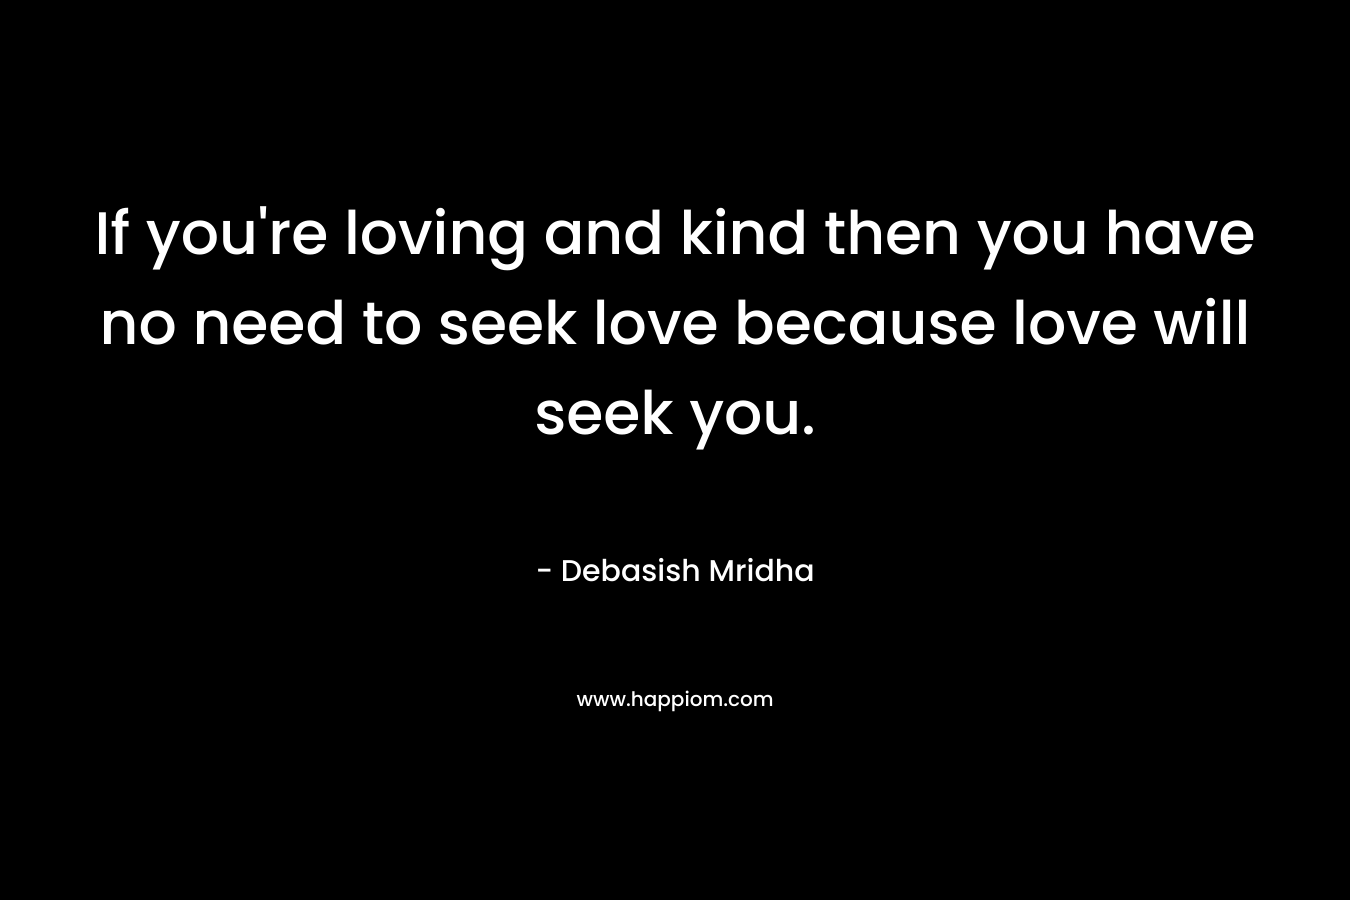 If you're loving and kind then you have no need to seek love because love will seek you.